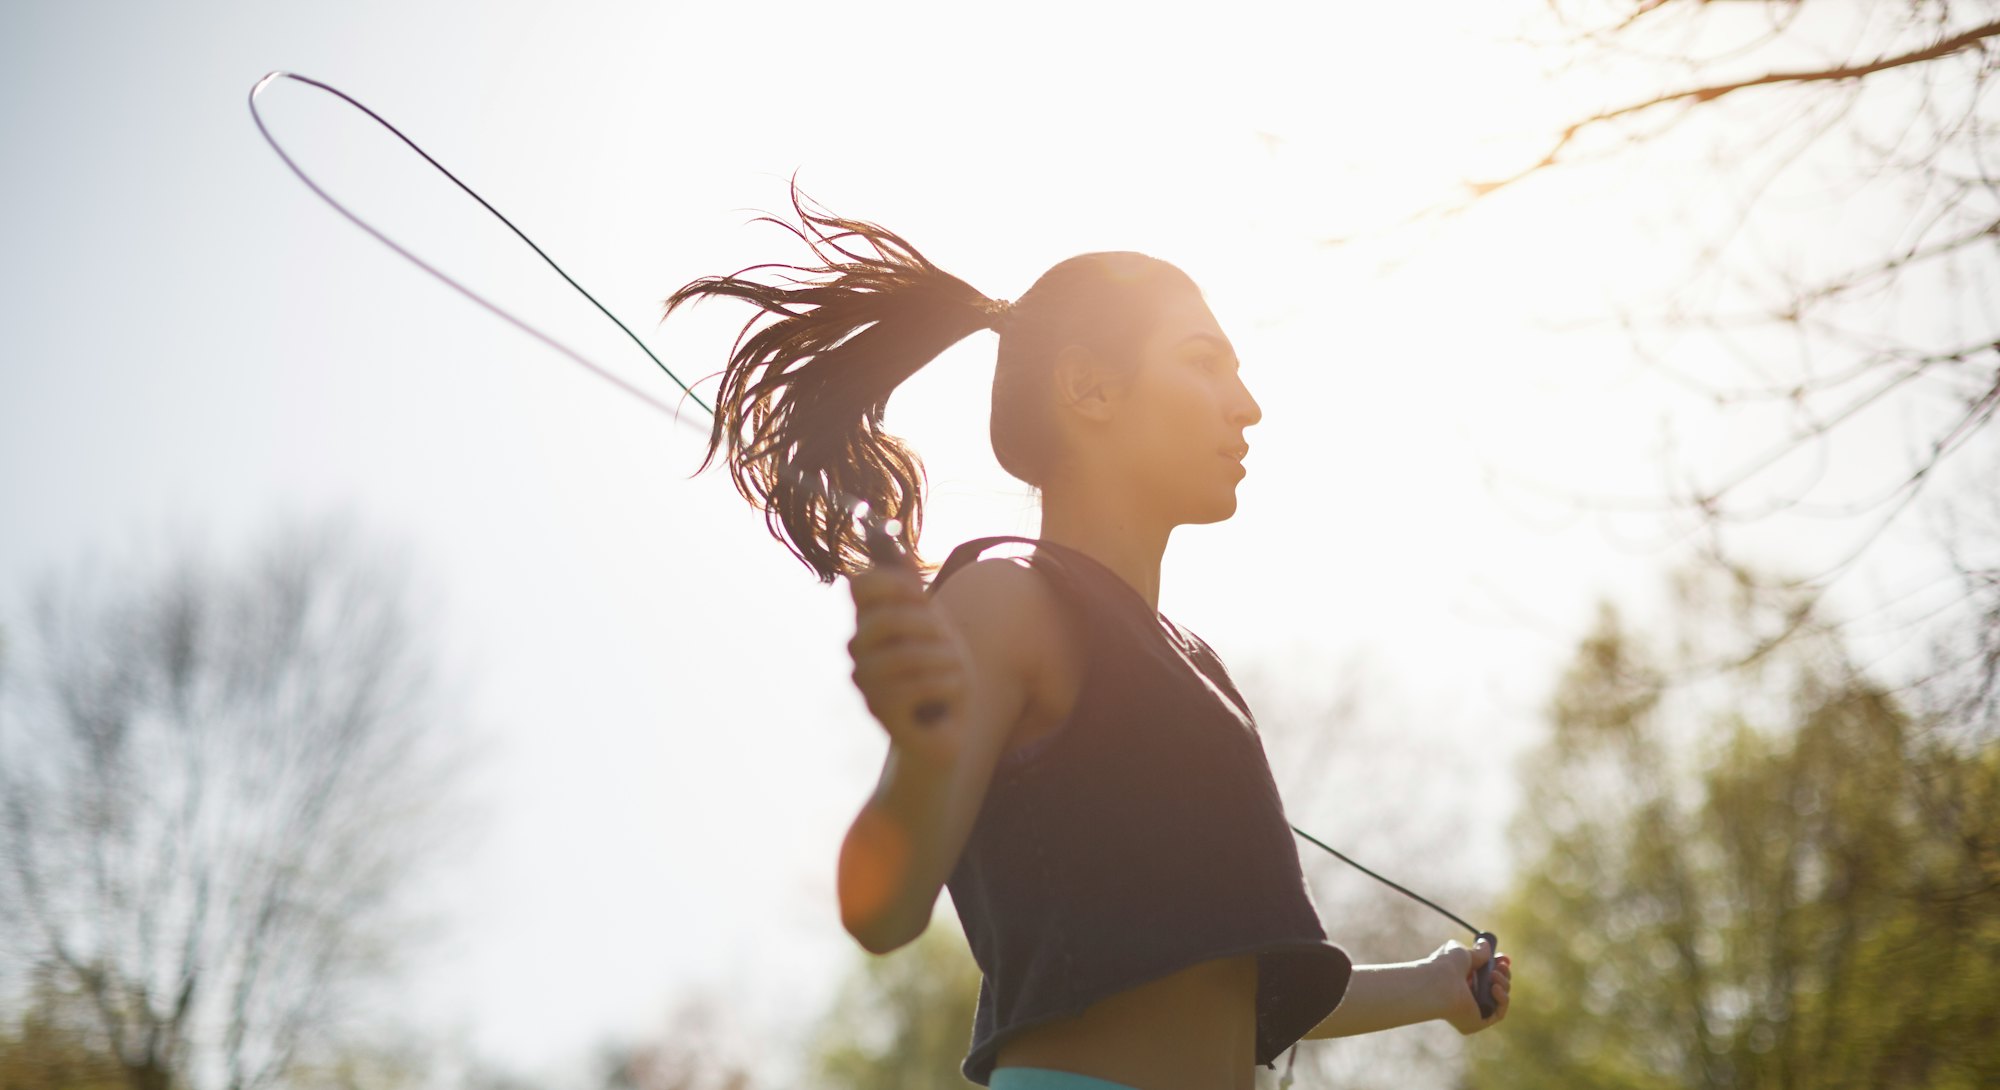 jump rope mental health exercise